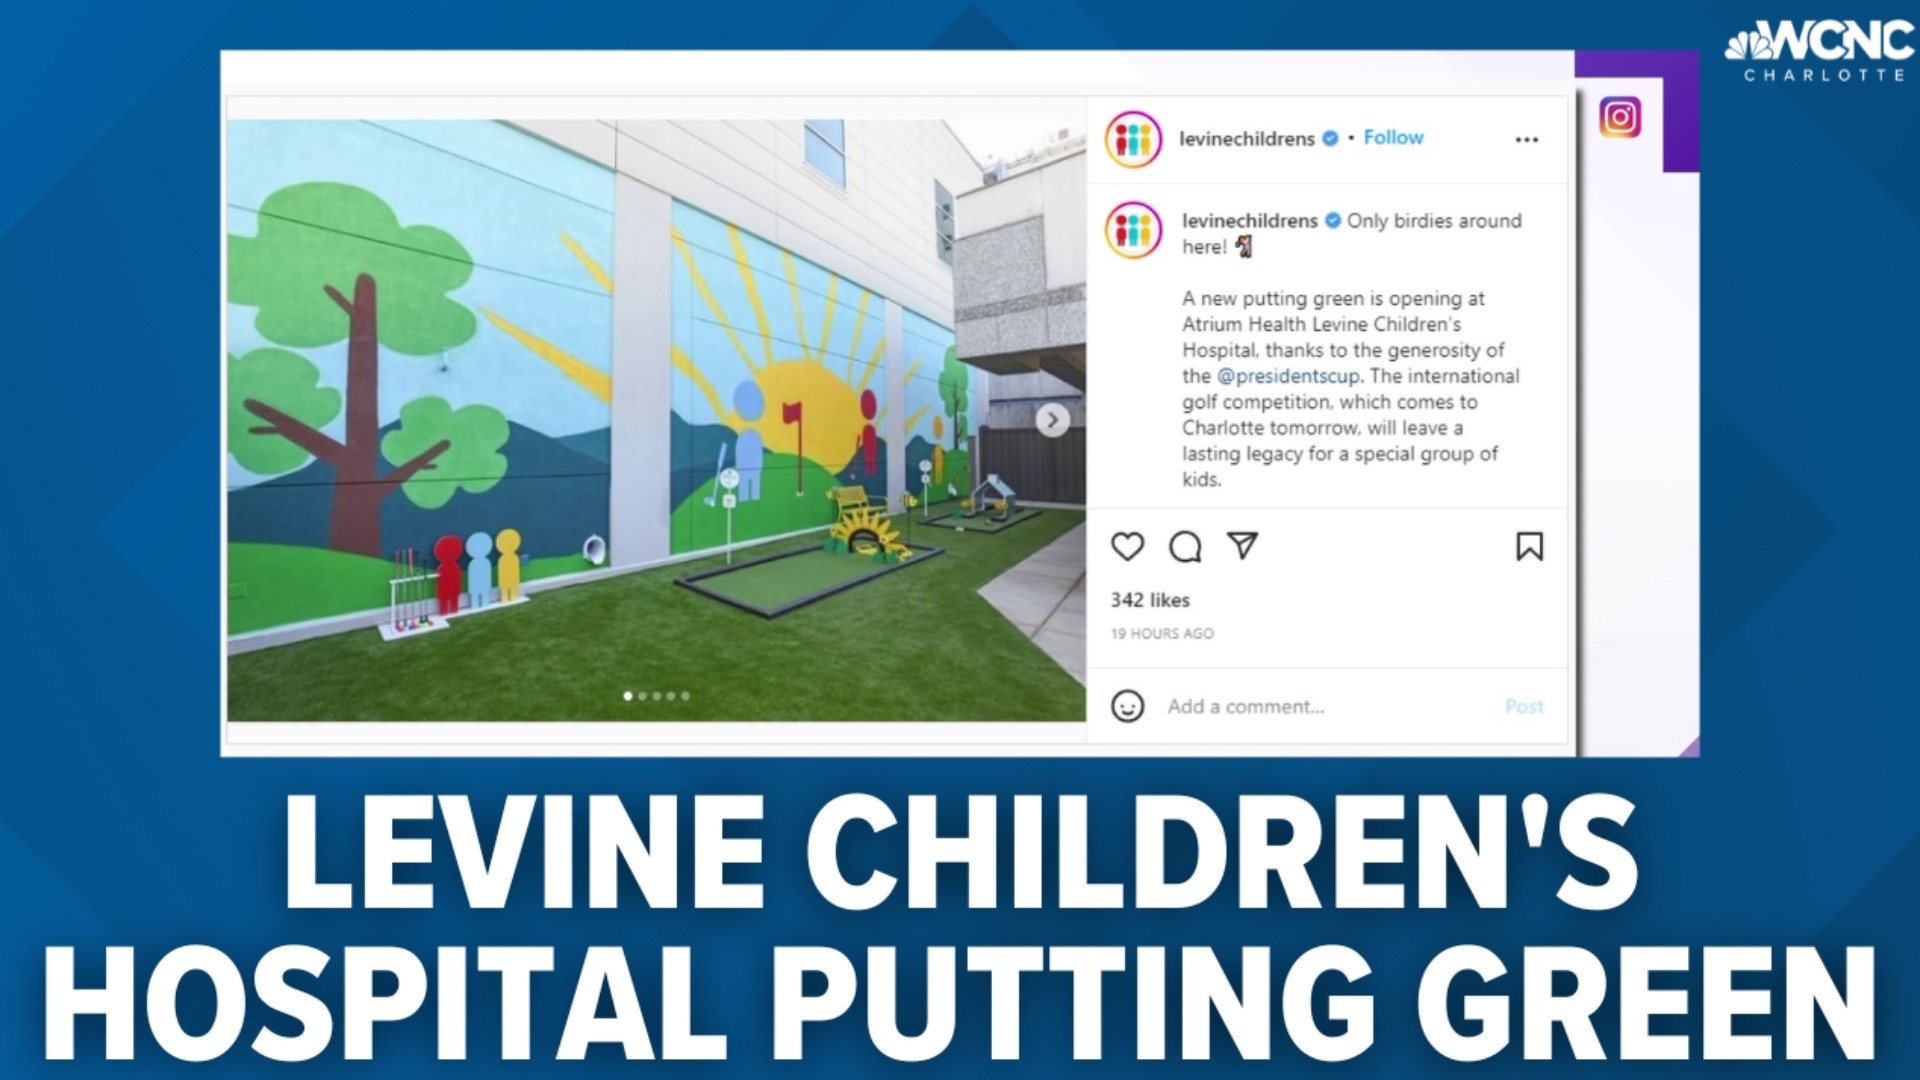 The President Cup provided Levine Children's Hospital practice greens to bring smiles to the children.